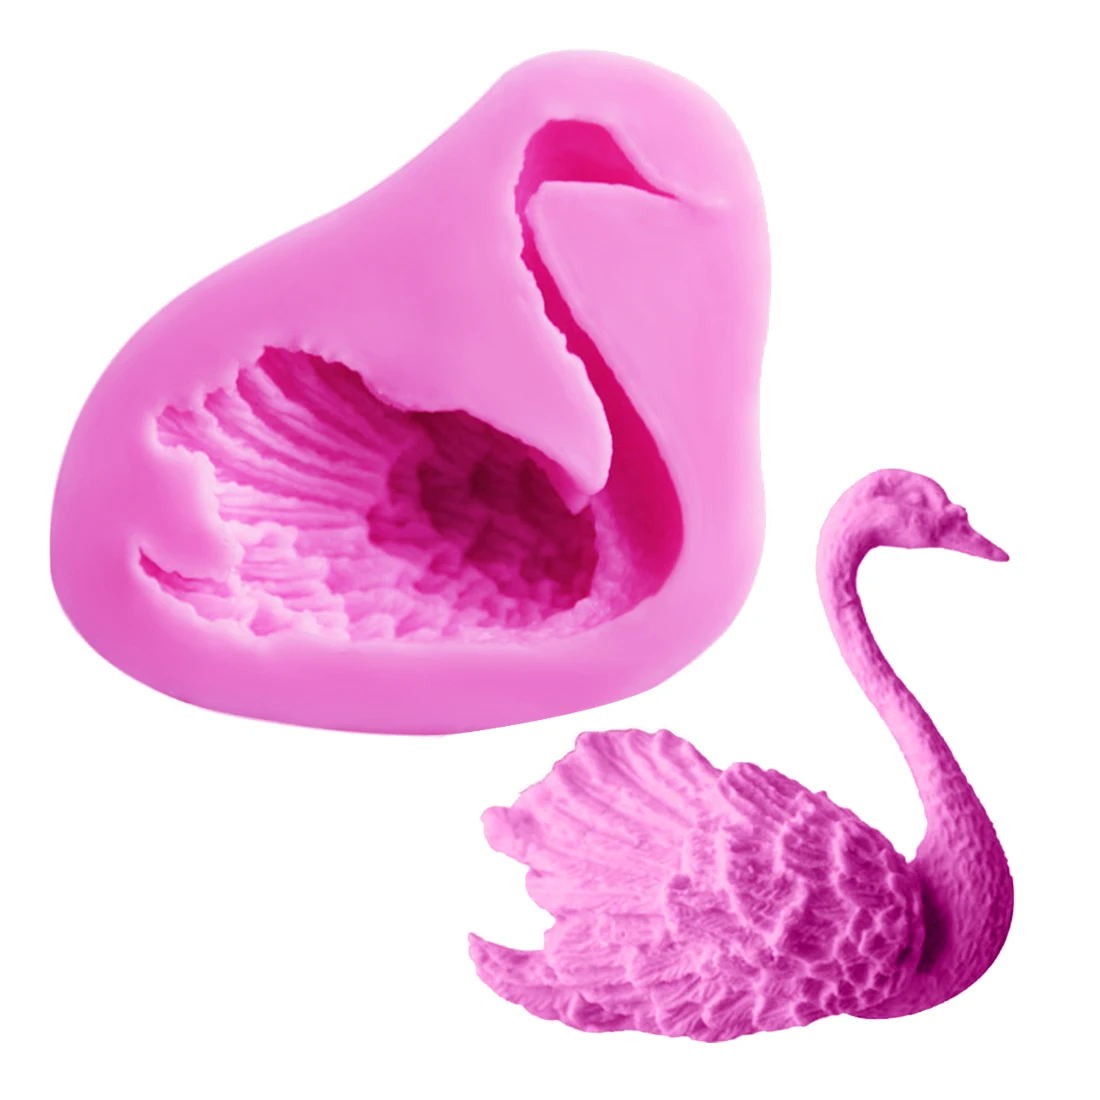 

Hot Cake Decorating Tools 1PC 3D Swan Shape Candy Mould Silicone Soap Mold Fondant Cake Chocolate Stencils Kitchen Pastry Baking